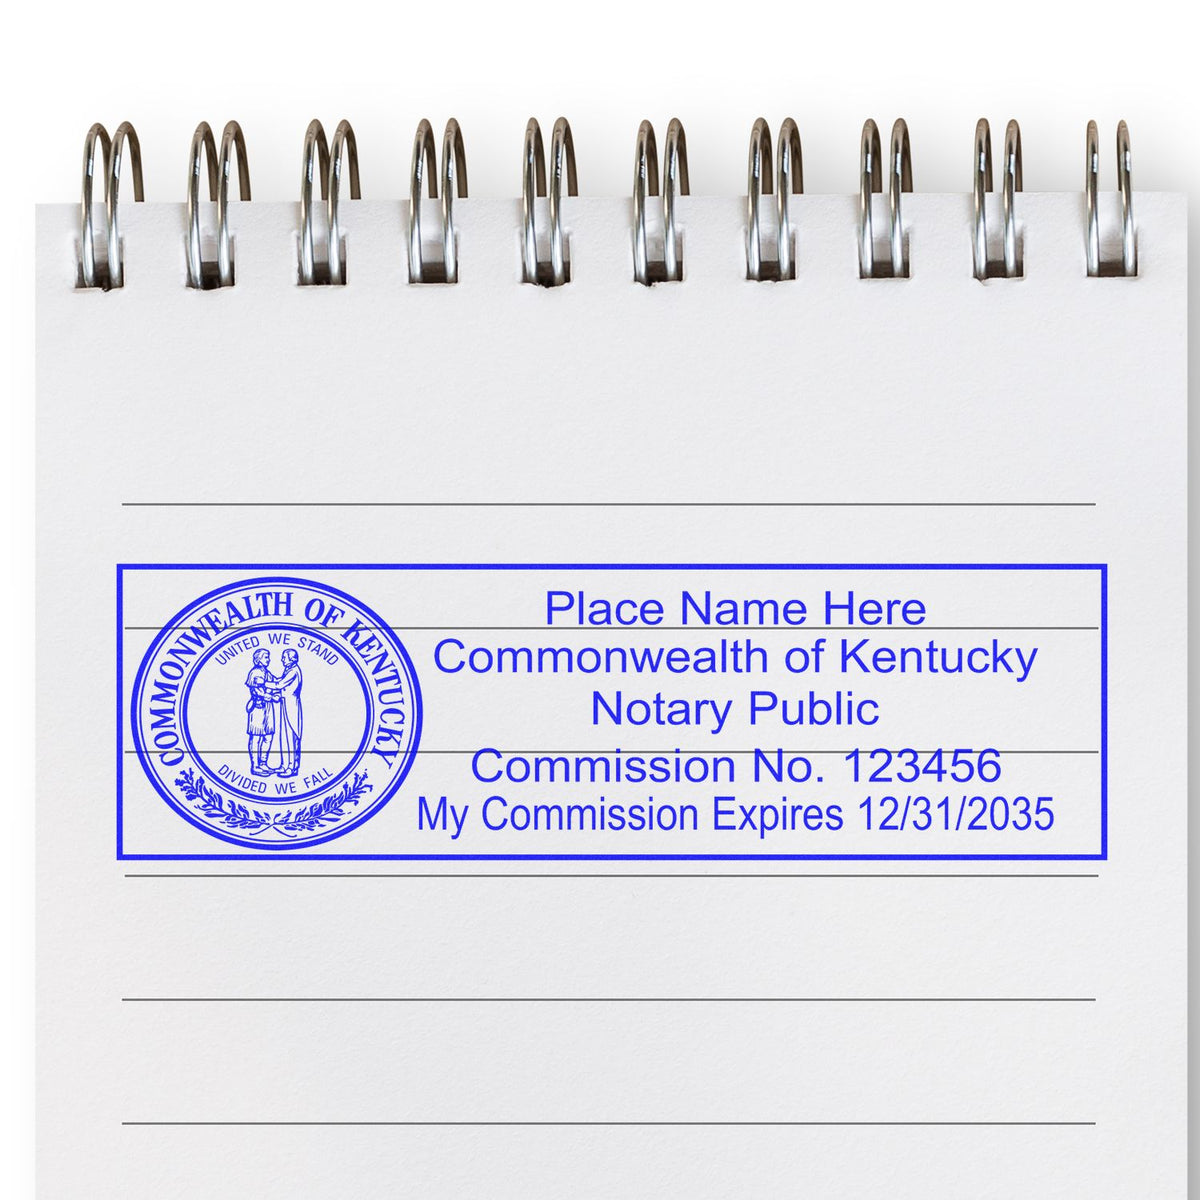 This paper is stamped with a sample imprint of the Wooden Handle Kentucky State Seal Notary Public Stamp, signifying its quality and reliability.